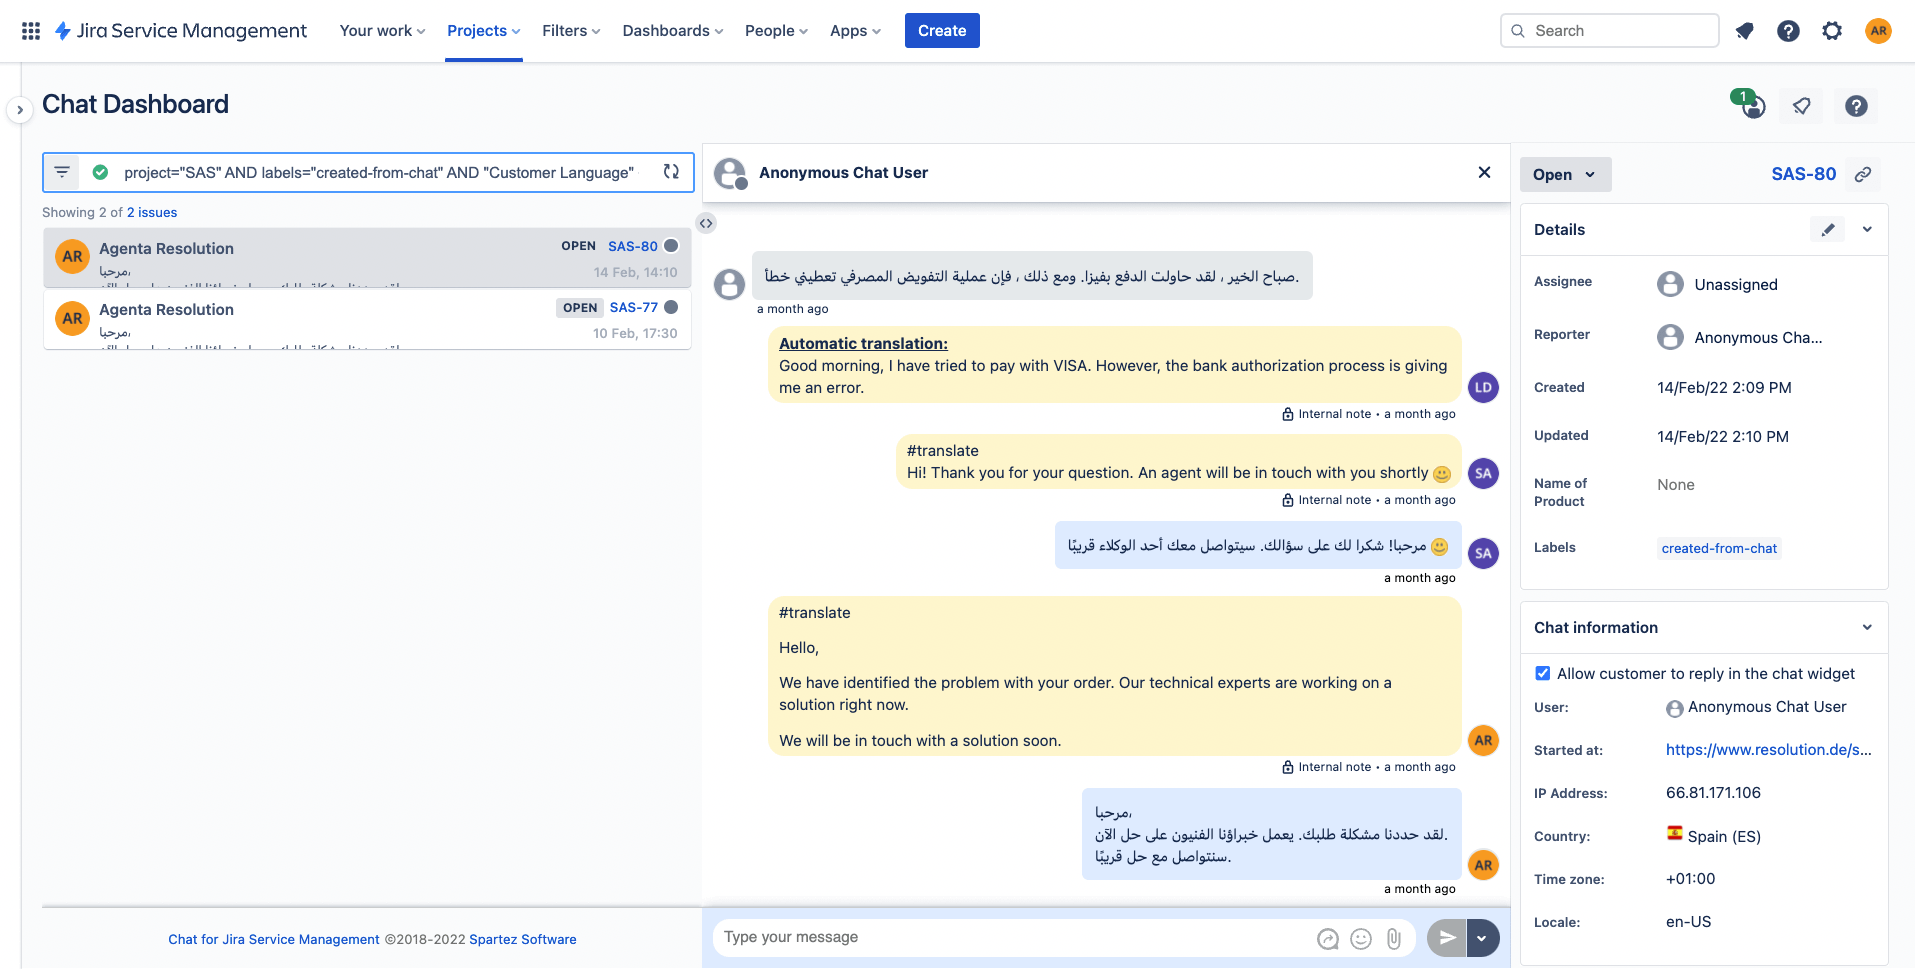 Chat for JSM is an essential piece of the chatbot